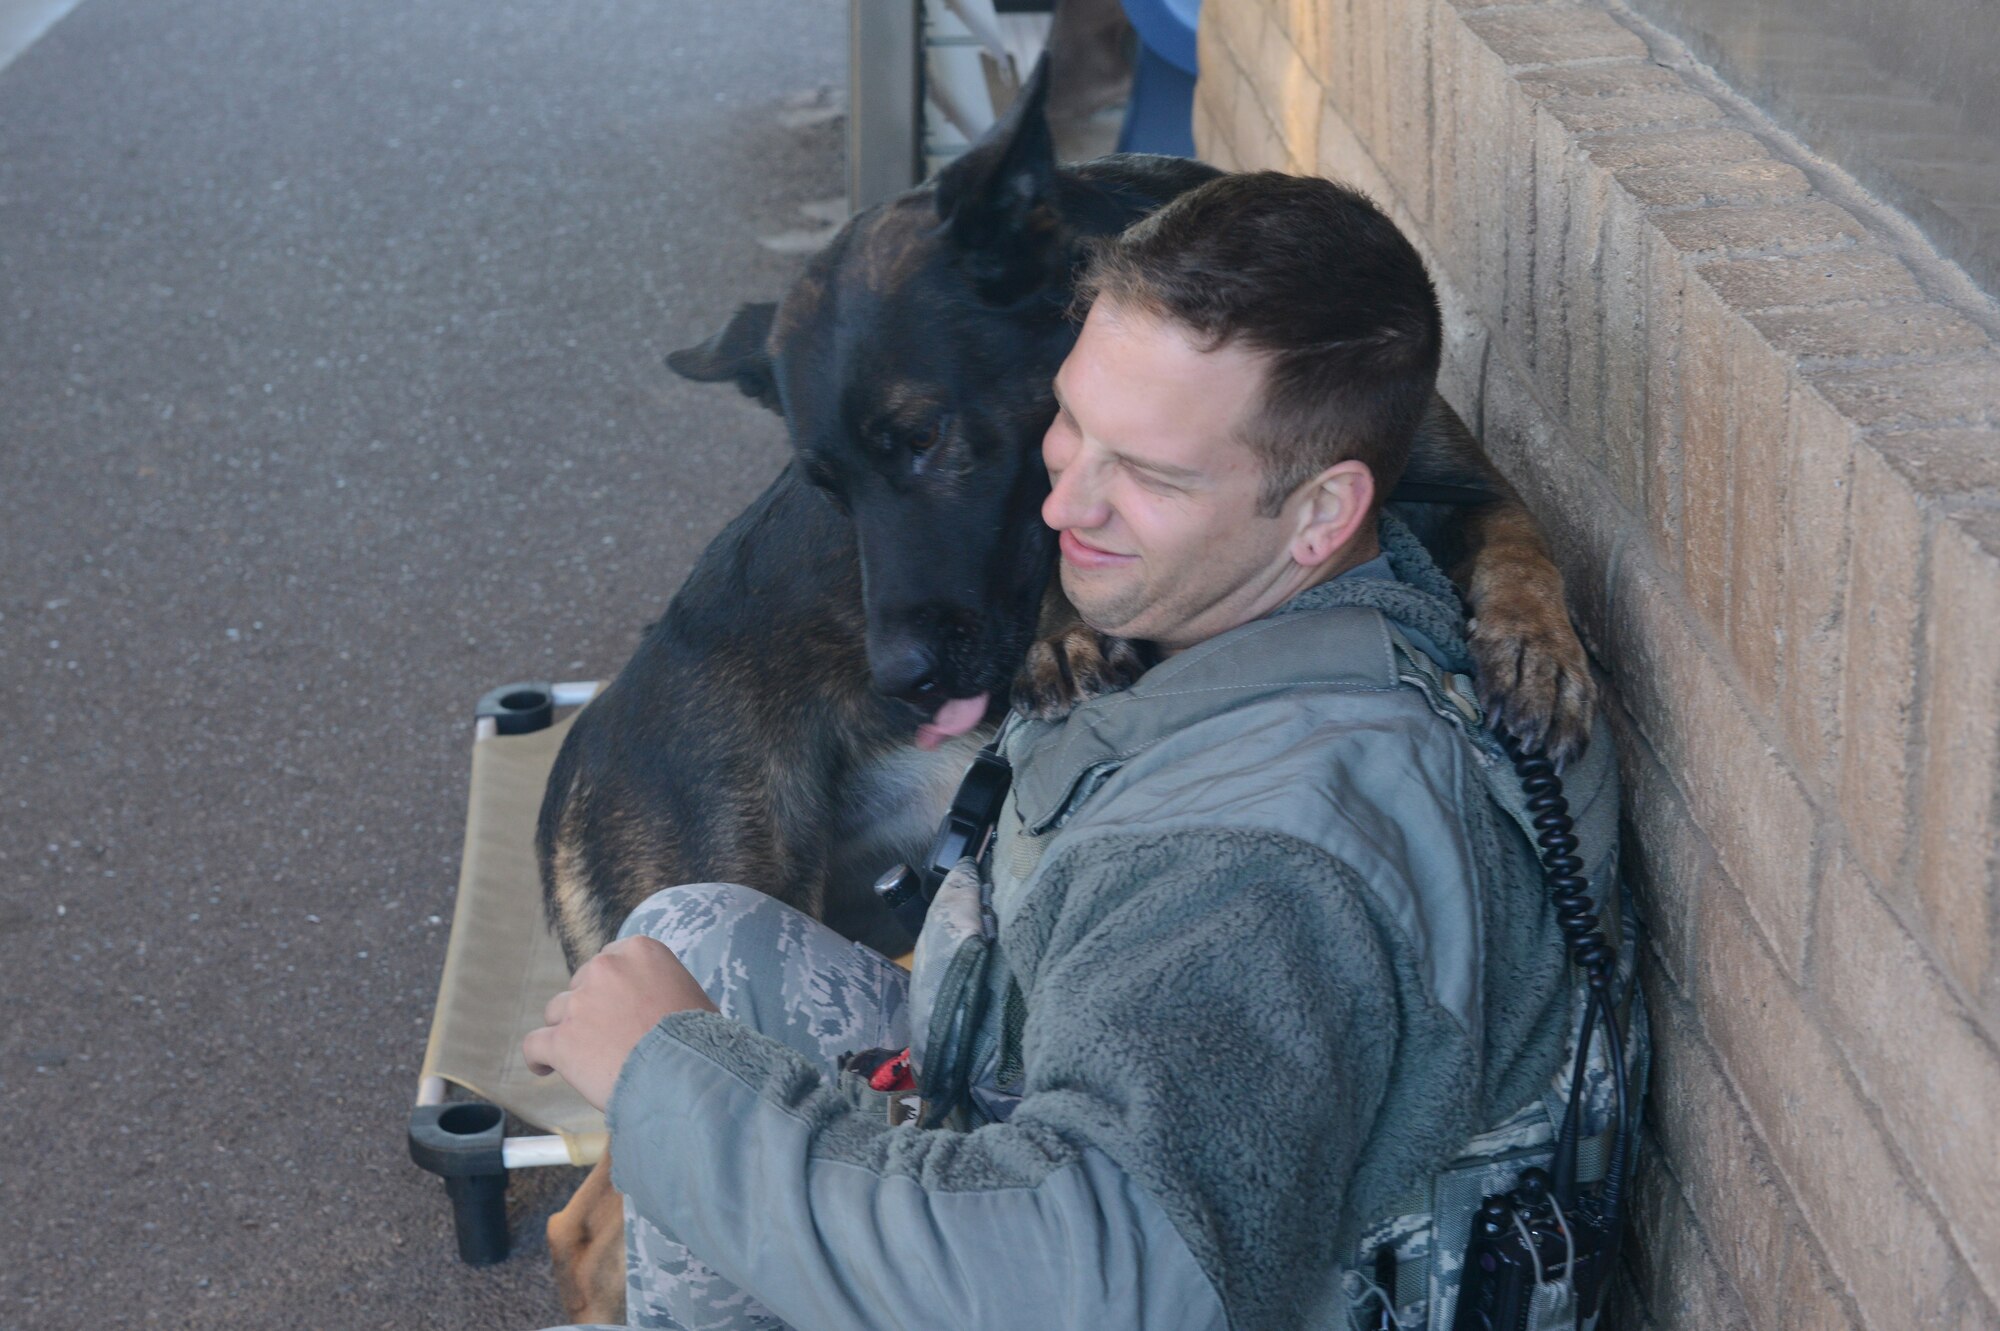 Rango, 56th Security Forces Squadron military working dog, licks Staff Sgt. Justin Gonzalez, 56th Security Forces Squadron MWD handler, at Luke Air Force Base, Arizona, Nov. 17, 2015. It’s important for MWD handlers to develop a good working relationship with their dogs to strengthen the bond between them, Gonzalez said. (U.S. Air Force photo by Senior Airman James Hensley)